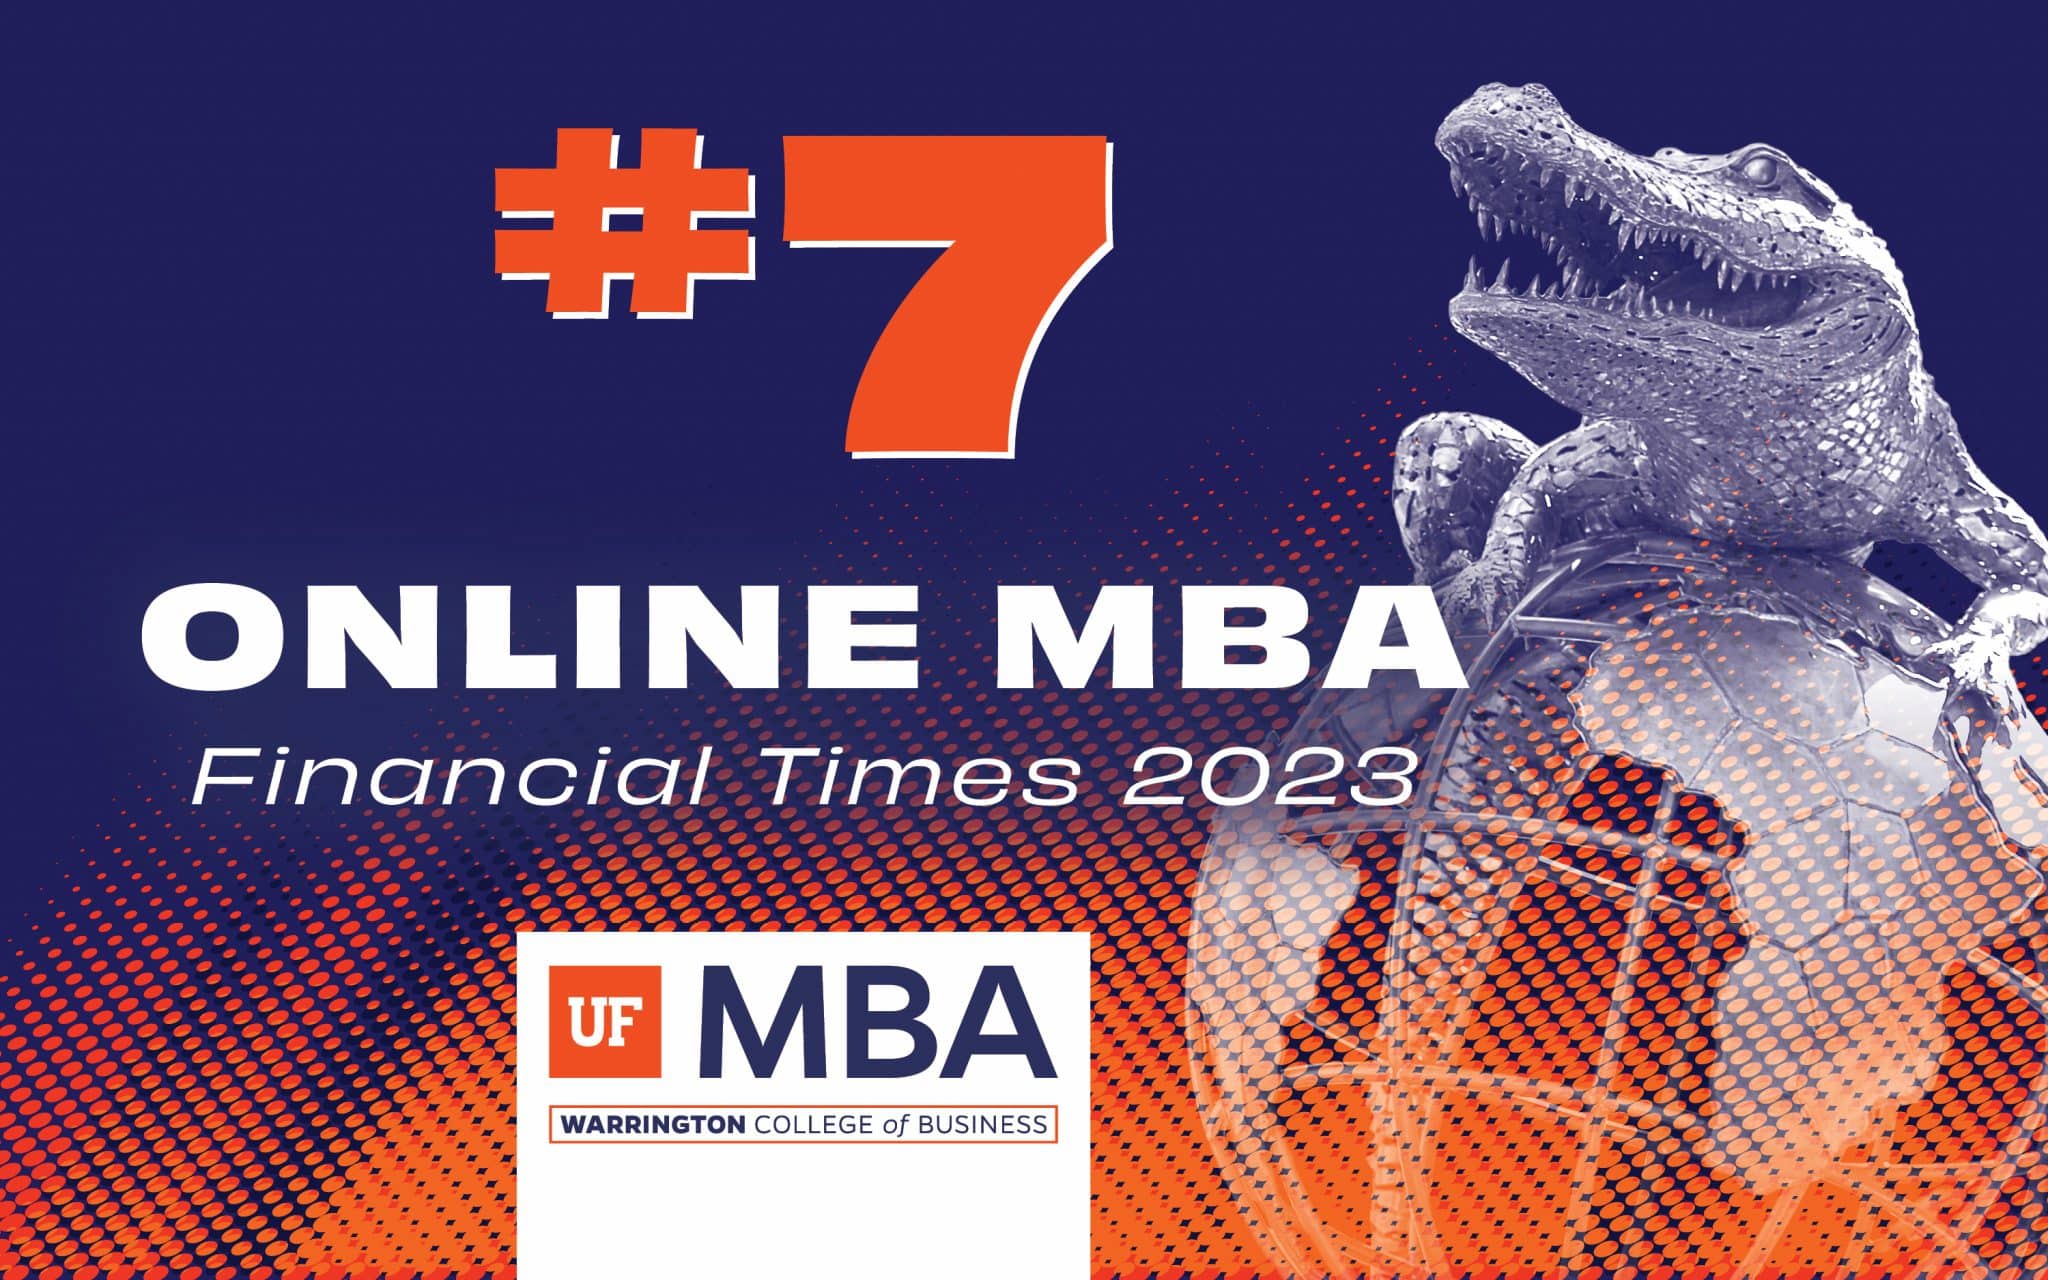 UF MBA Online program earns another top recognition from Financial